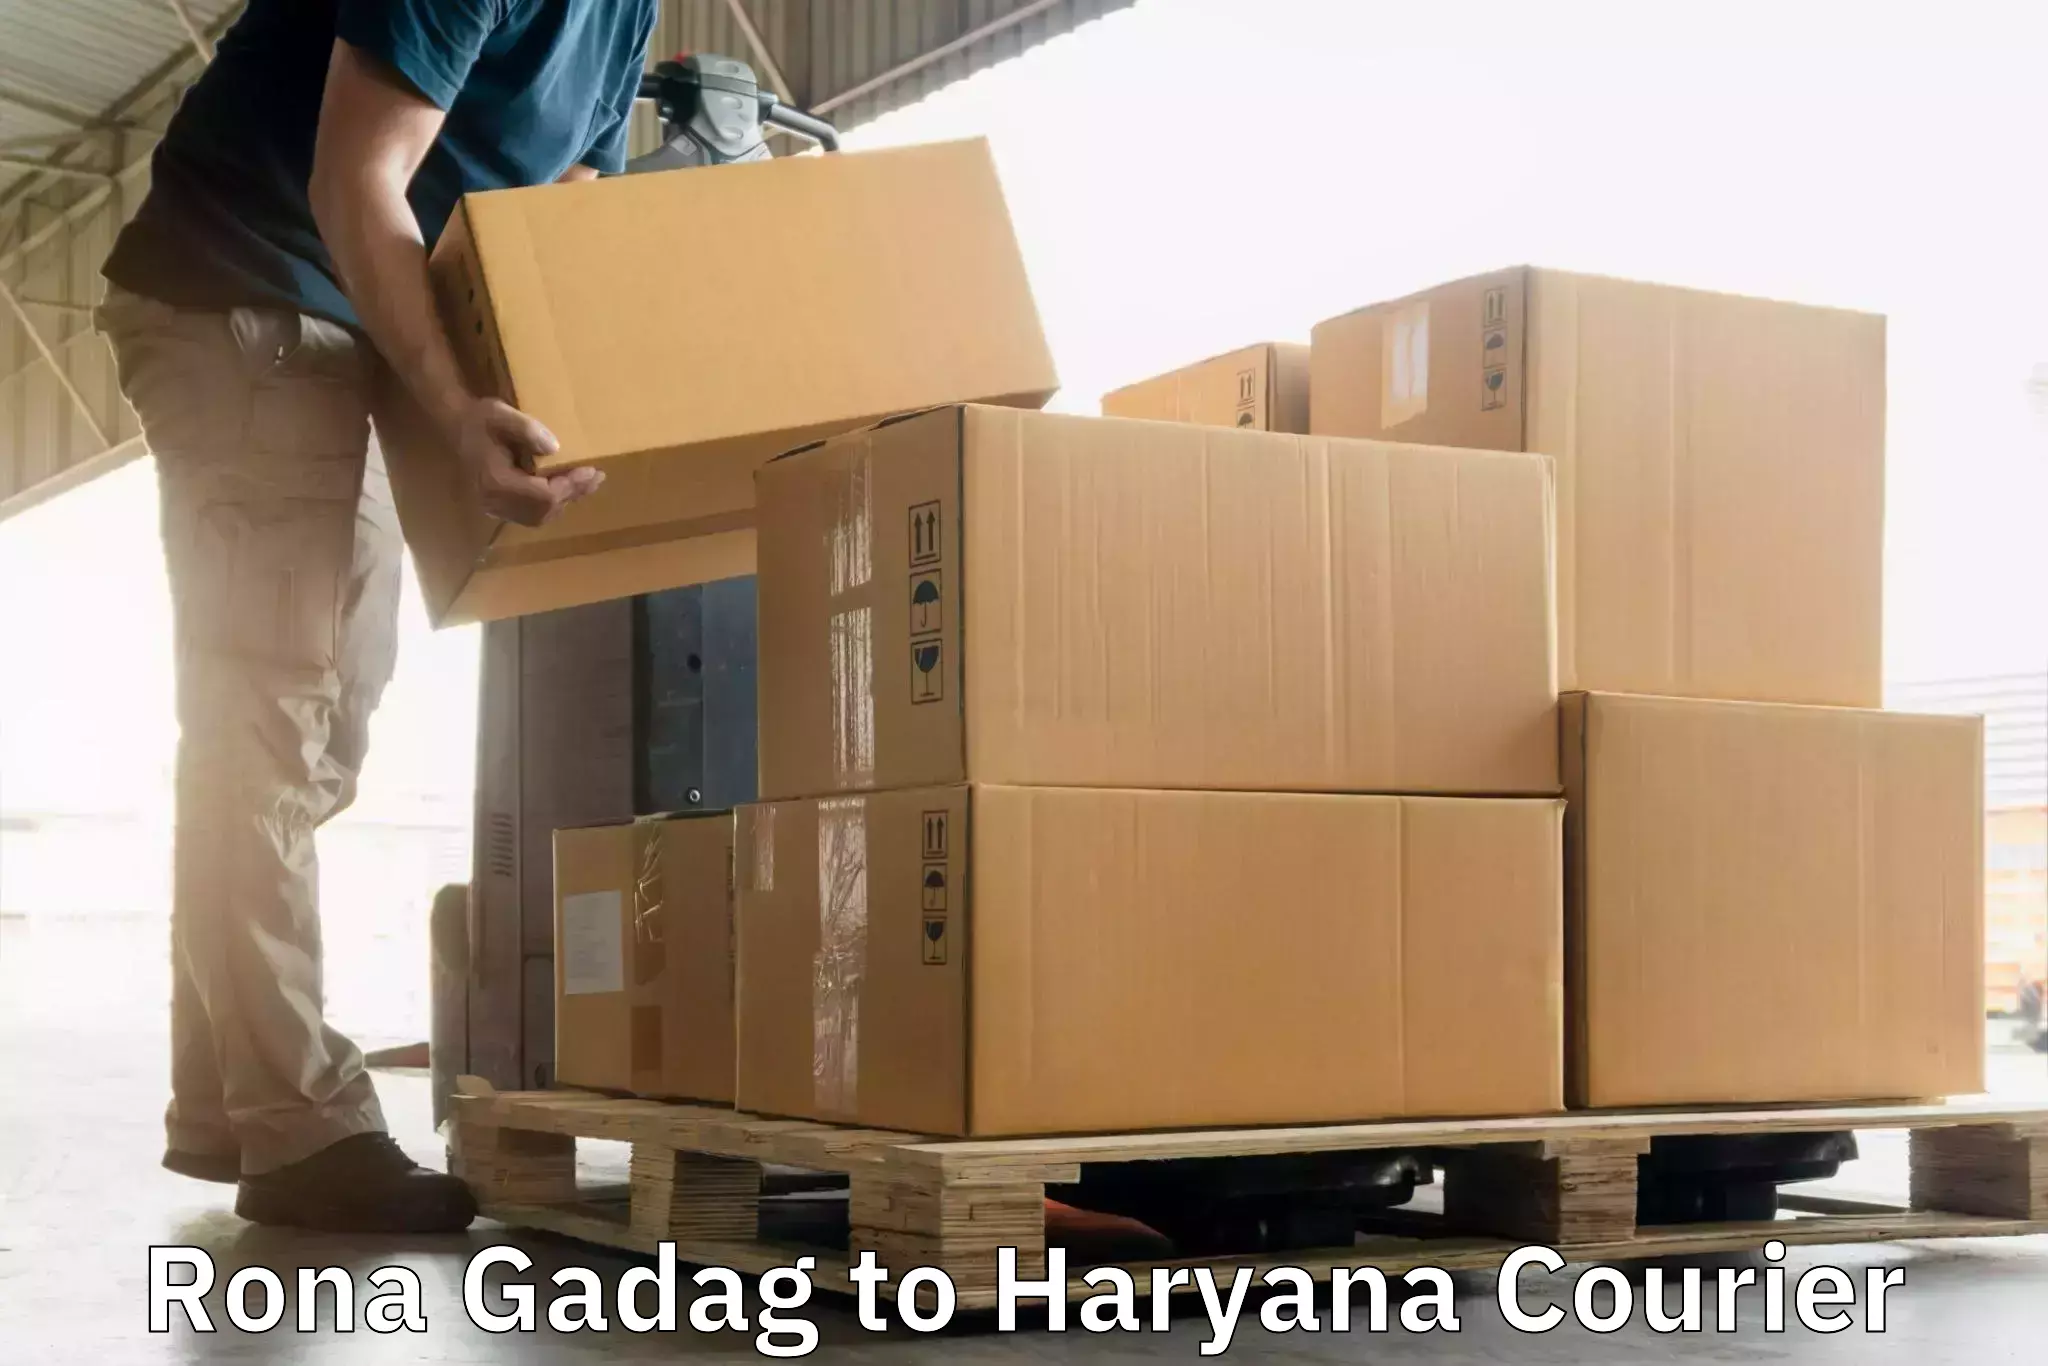 End-to-end delivery Rona Gadag to Gurugram